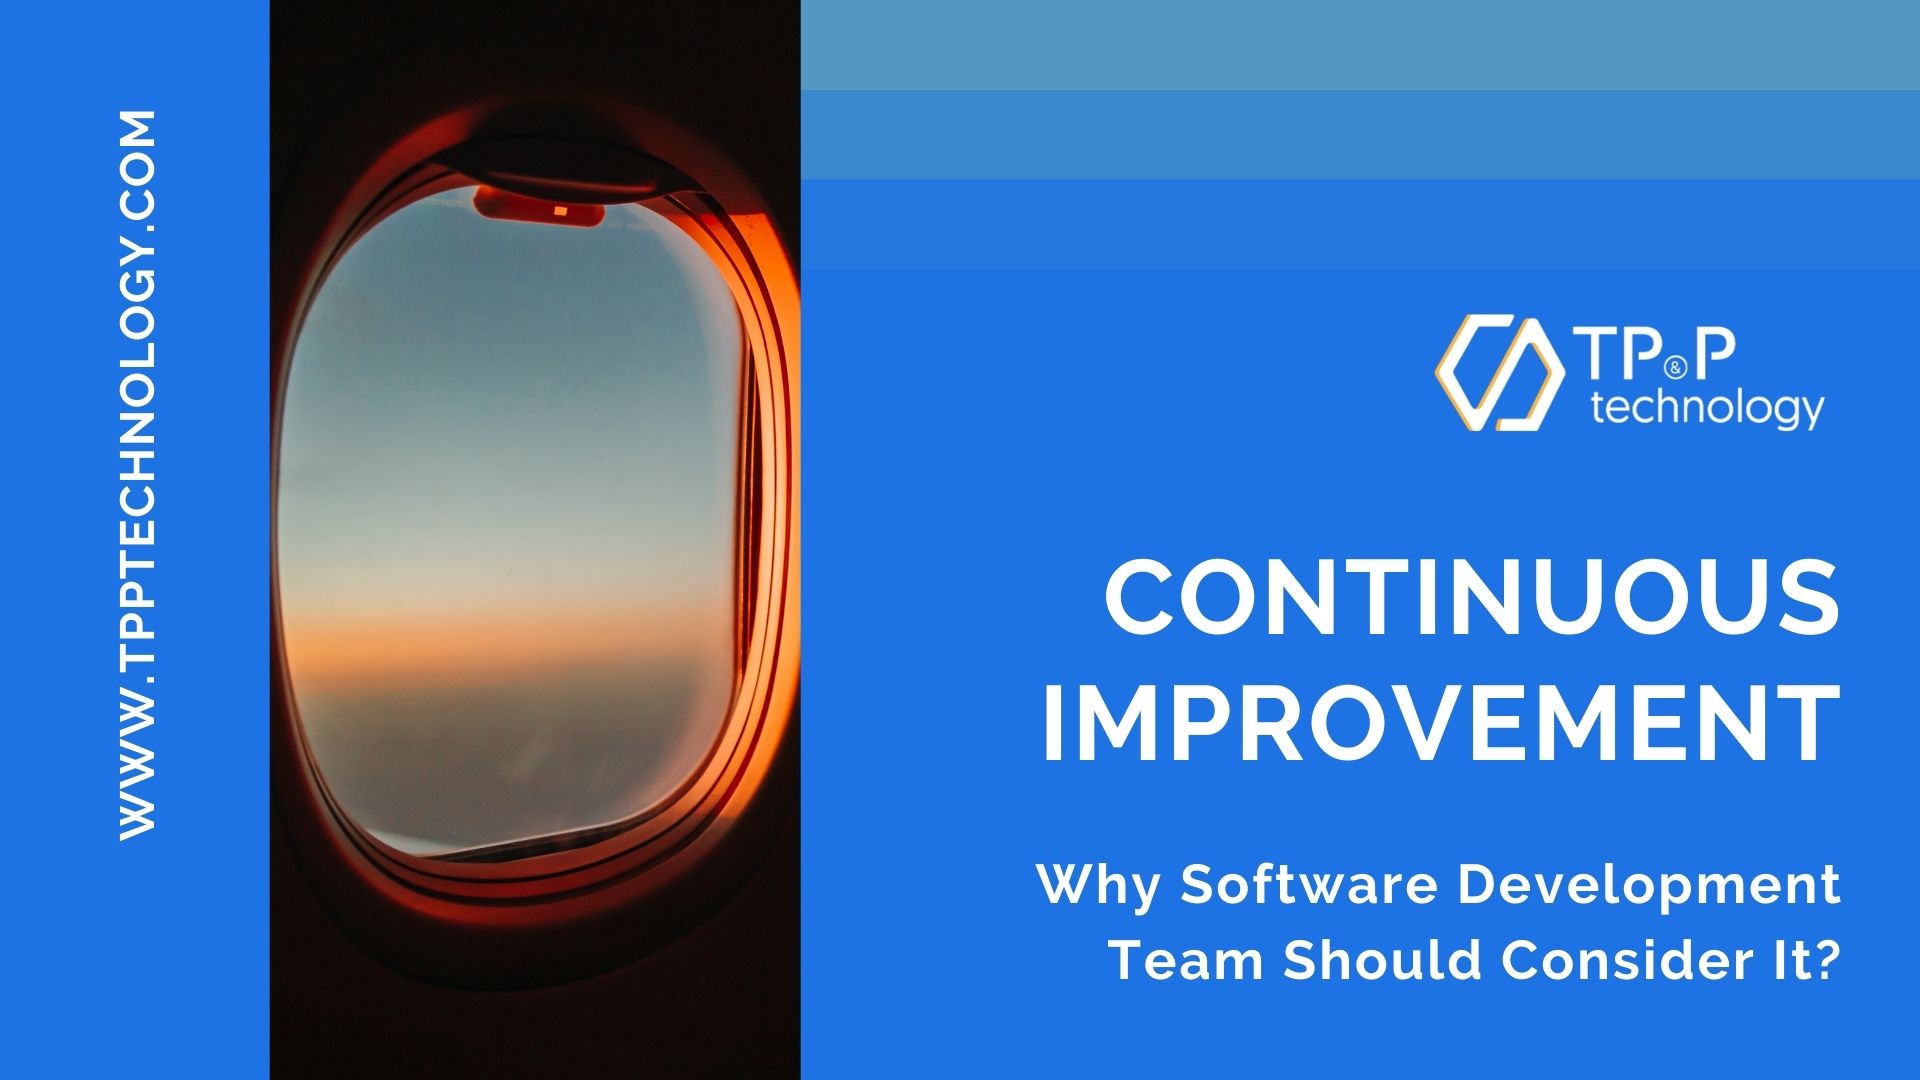 Continuous Improvement: Why Software Development Team Should Consider It?